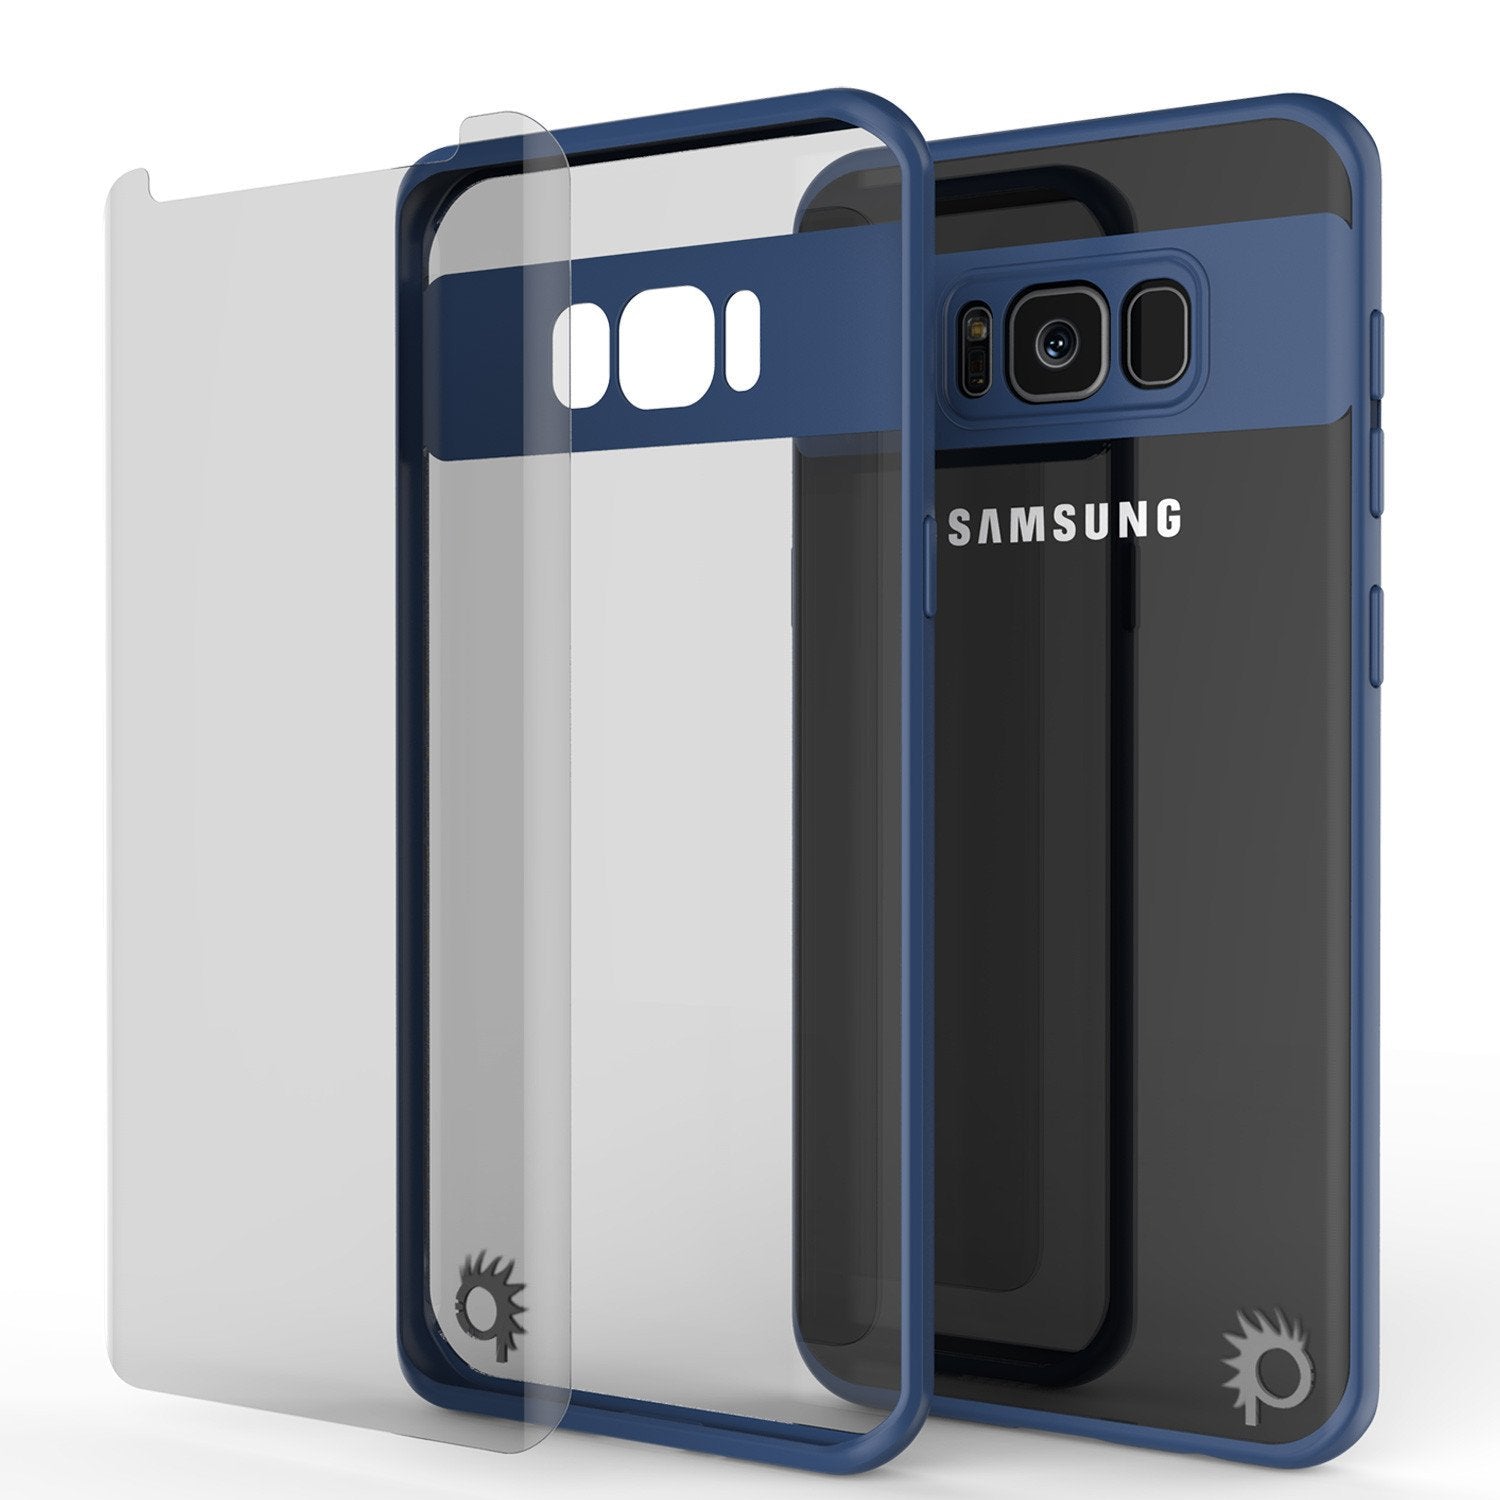 Galaxy S8 Case, Punkcase [MASK Series] [NAVY] Full Body Hybrid Dual Layer TPU Cover W/ Protective PUNKSHIELD Screen Protector - PunkCase NZ